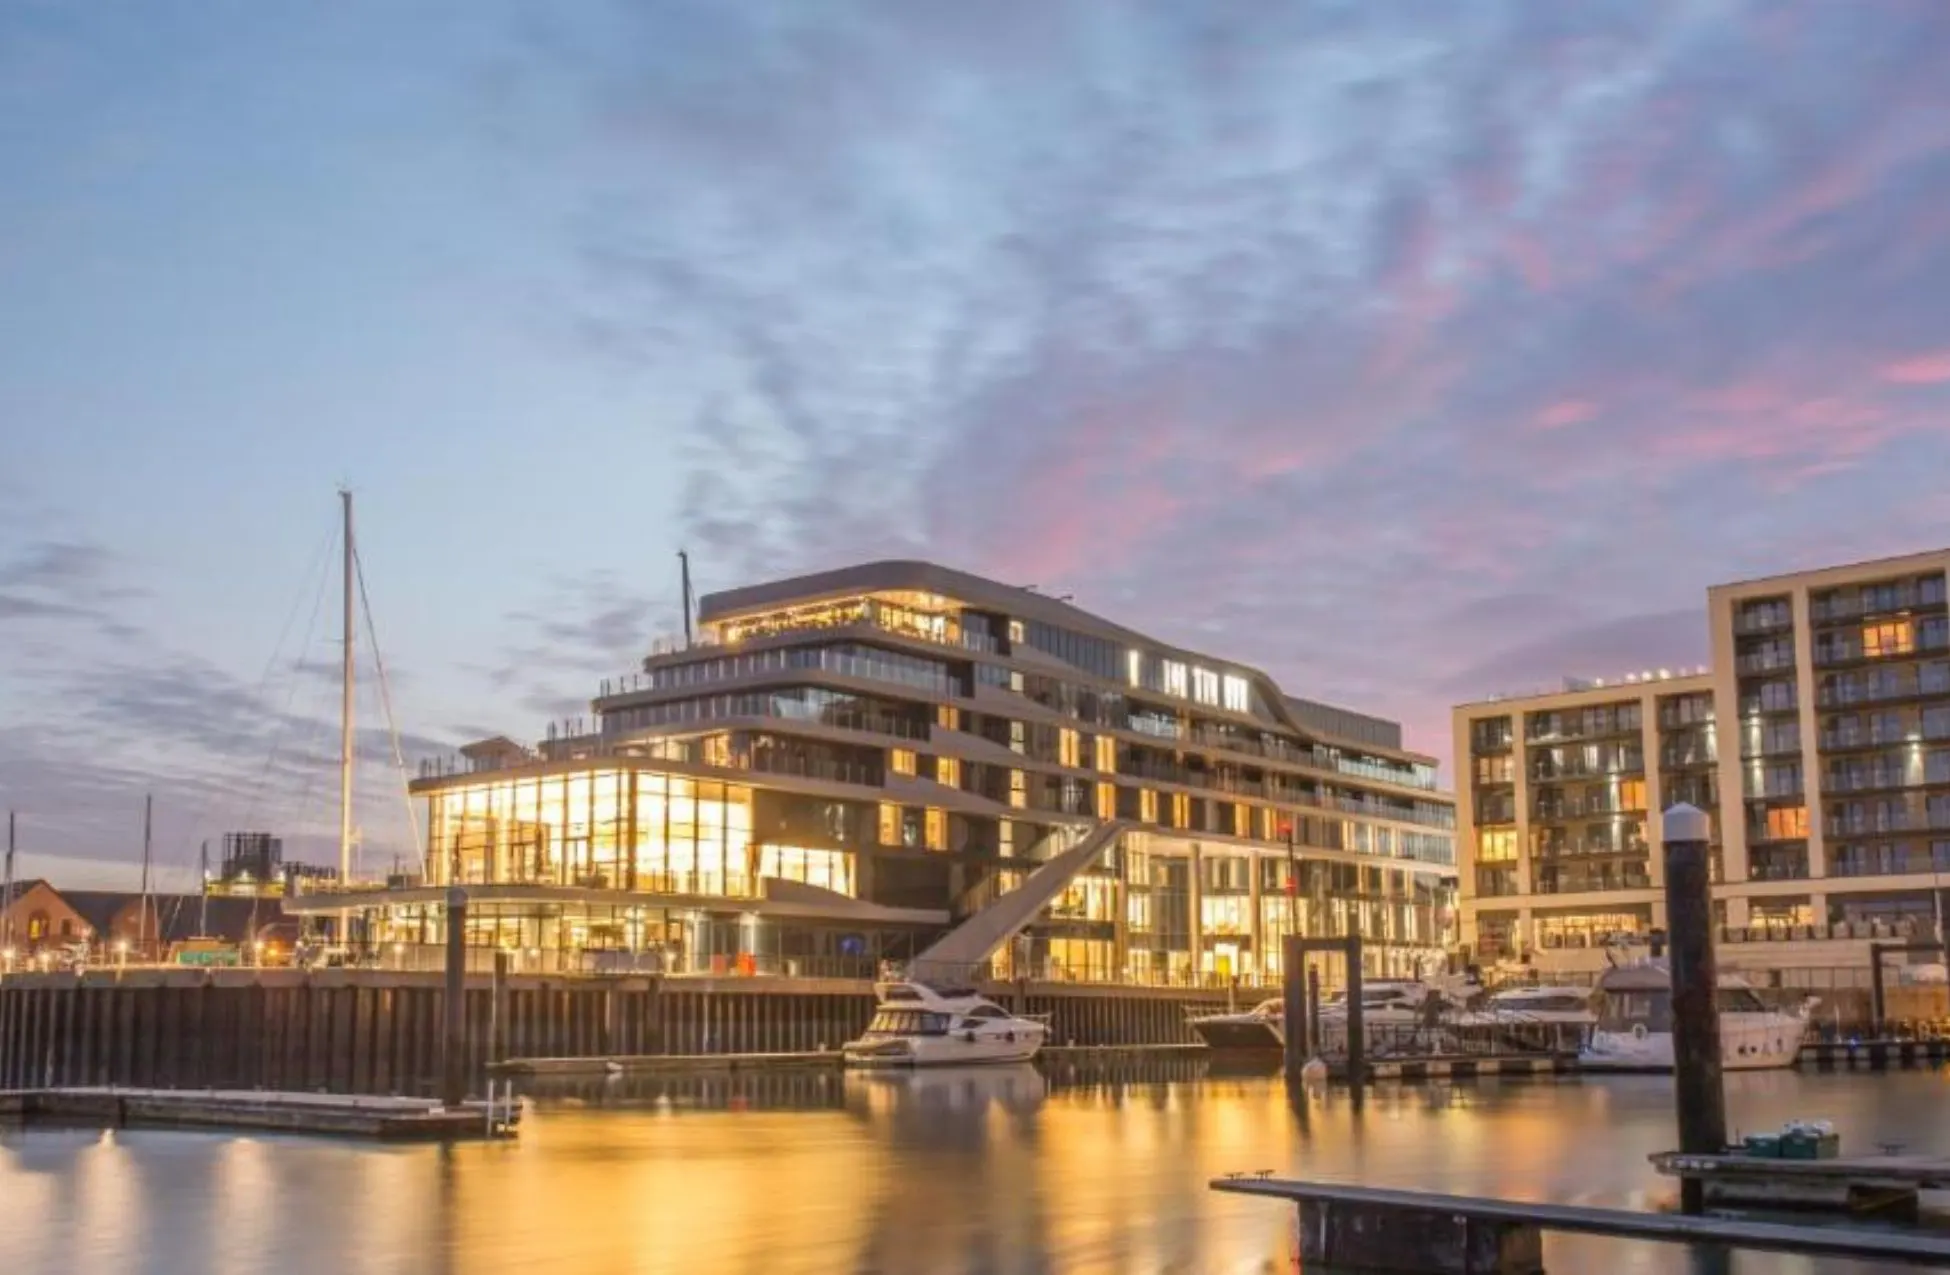 Harbour Hotel Southampton - Best Hotels In Southampton